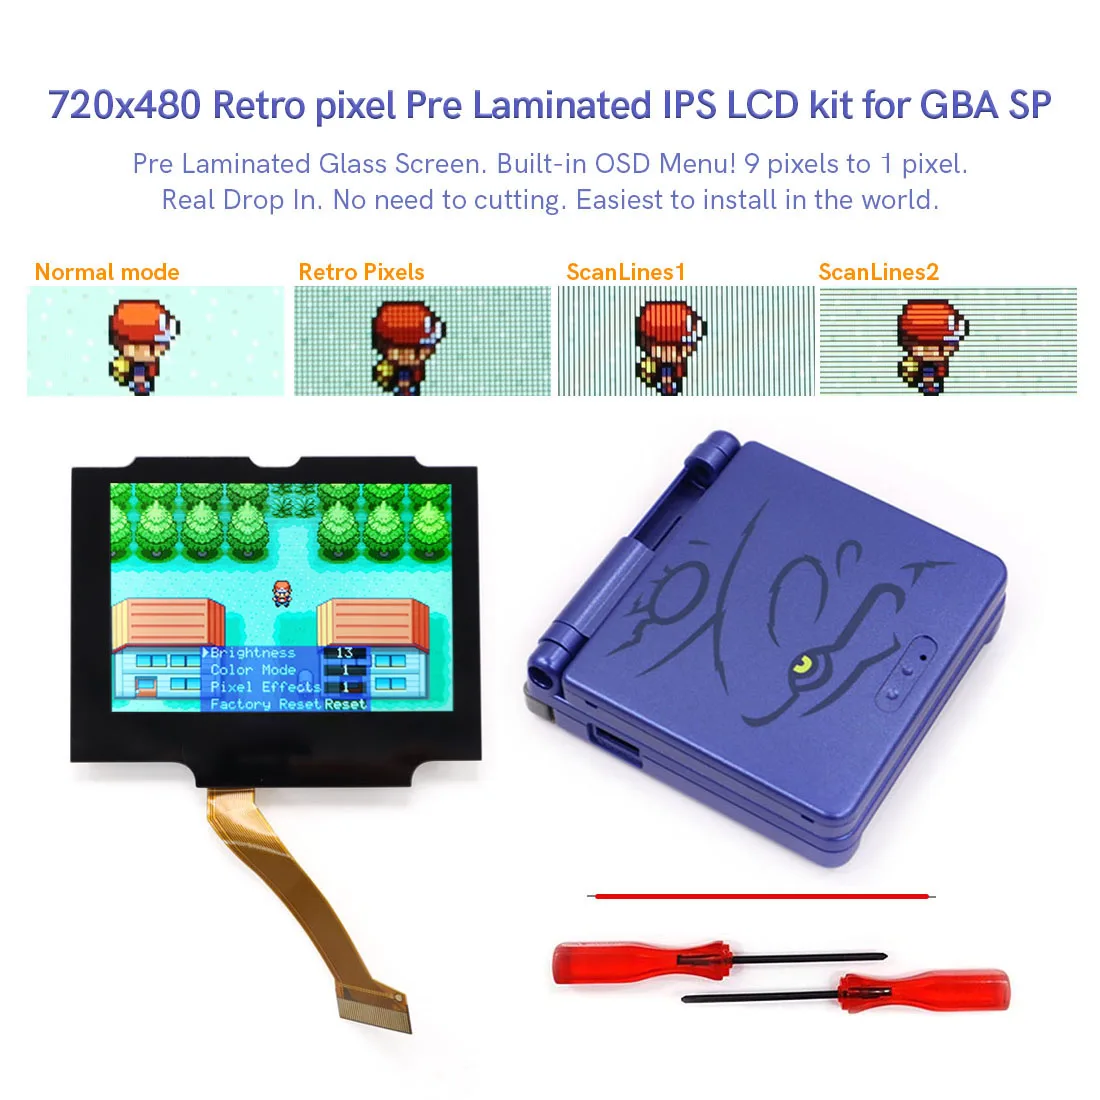 

Drop In GBA SP 3.0-inch 720x480 Retro Pixel Laminated LCD V5 IPS Backlight Kit w/Pokmen Kyogre Shell for Game boy Advance SP